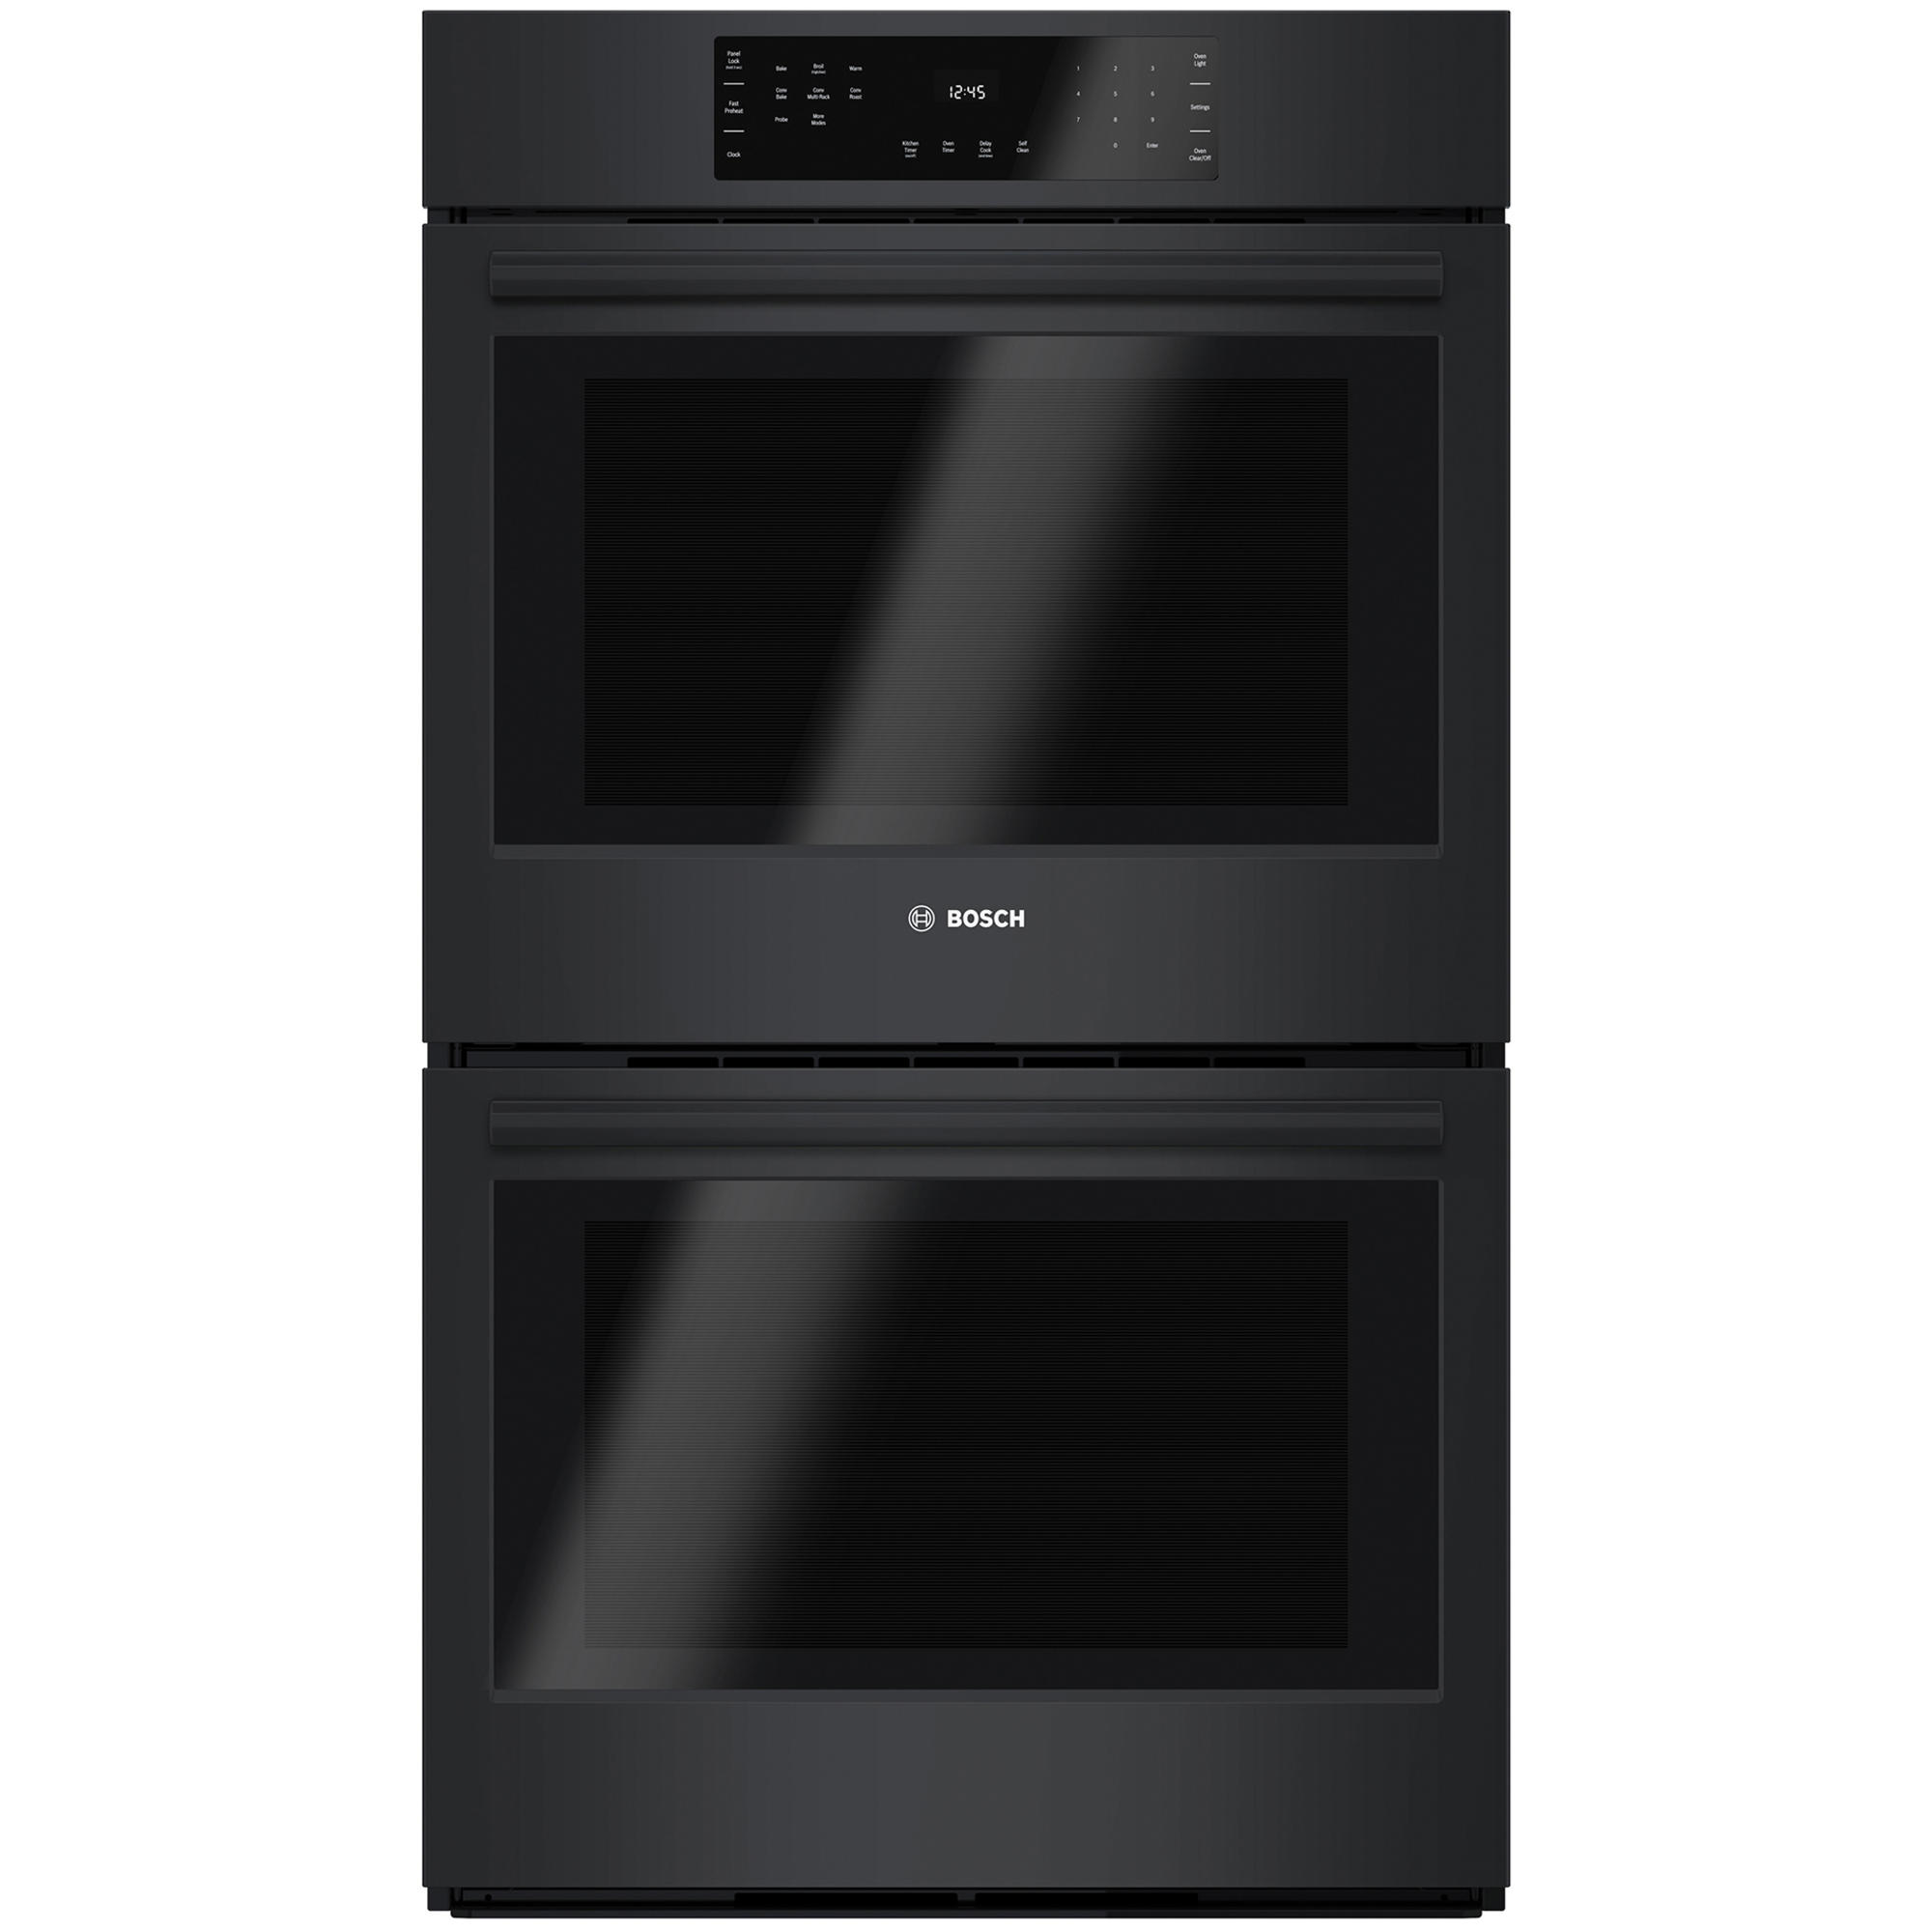 Bosch Hbl8751ucc 01 Wall Oven Microwave Combo Manual